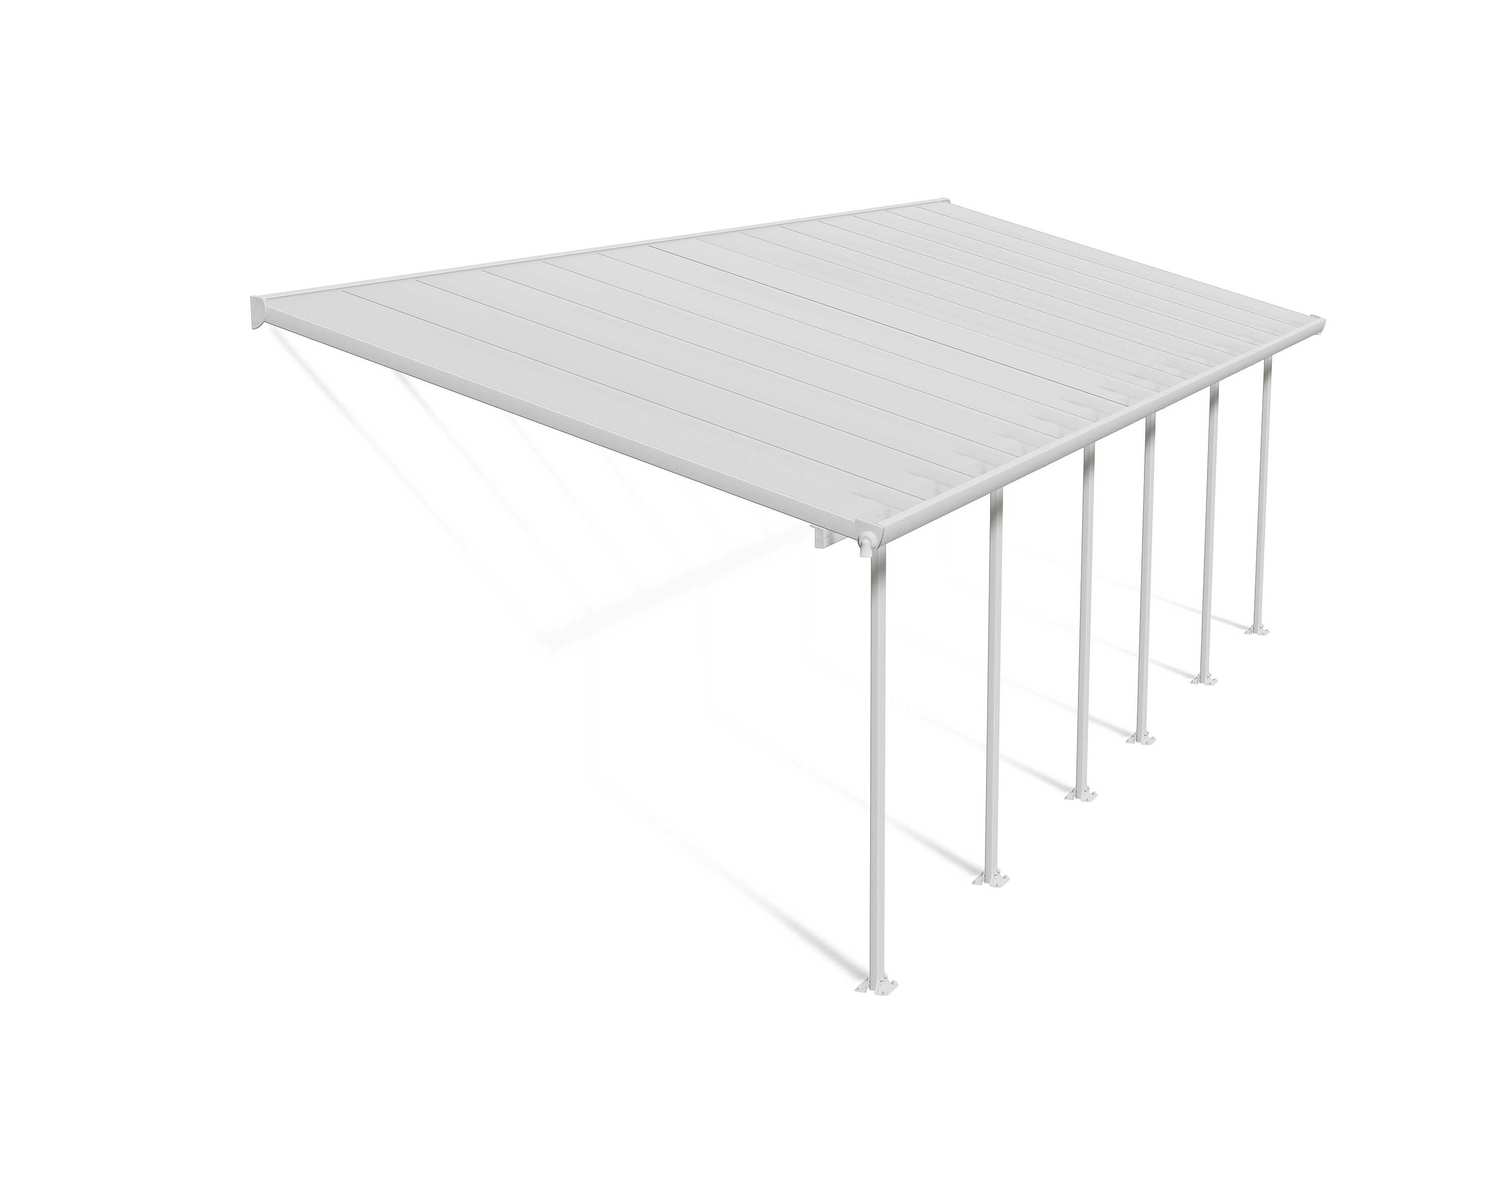 Feria 10 ft. x 28 ft. White Aluminium Patio Cover With 6 Posts, Clear Twin-Wall Polycarbonate Roof Panels.